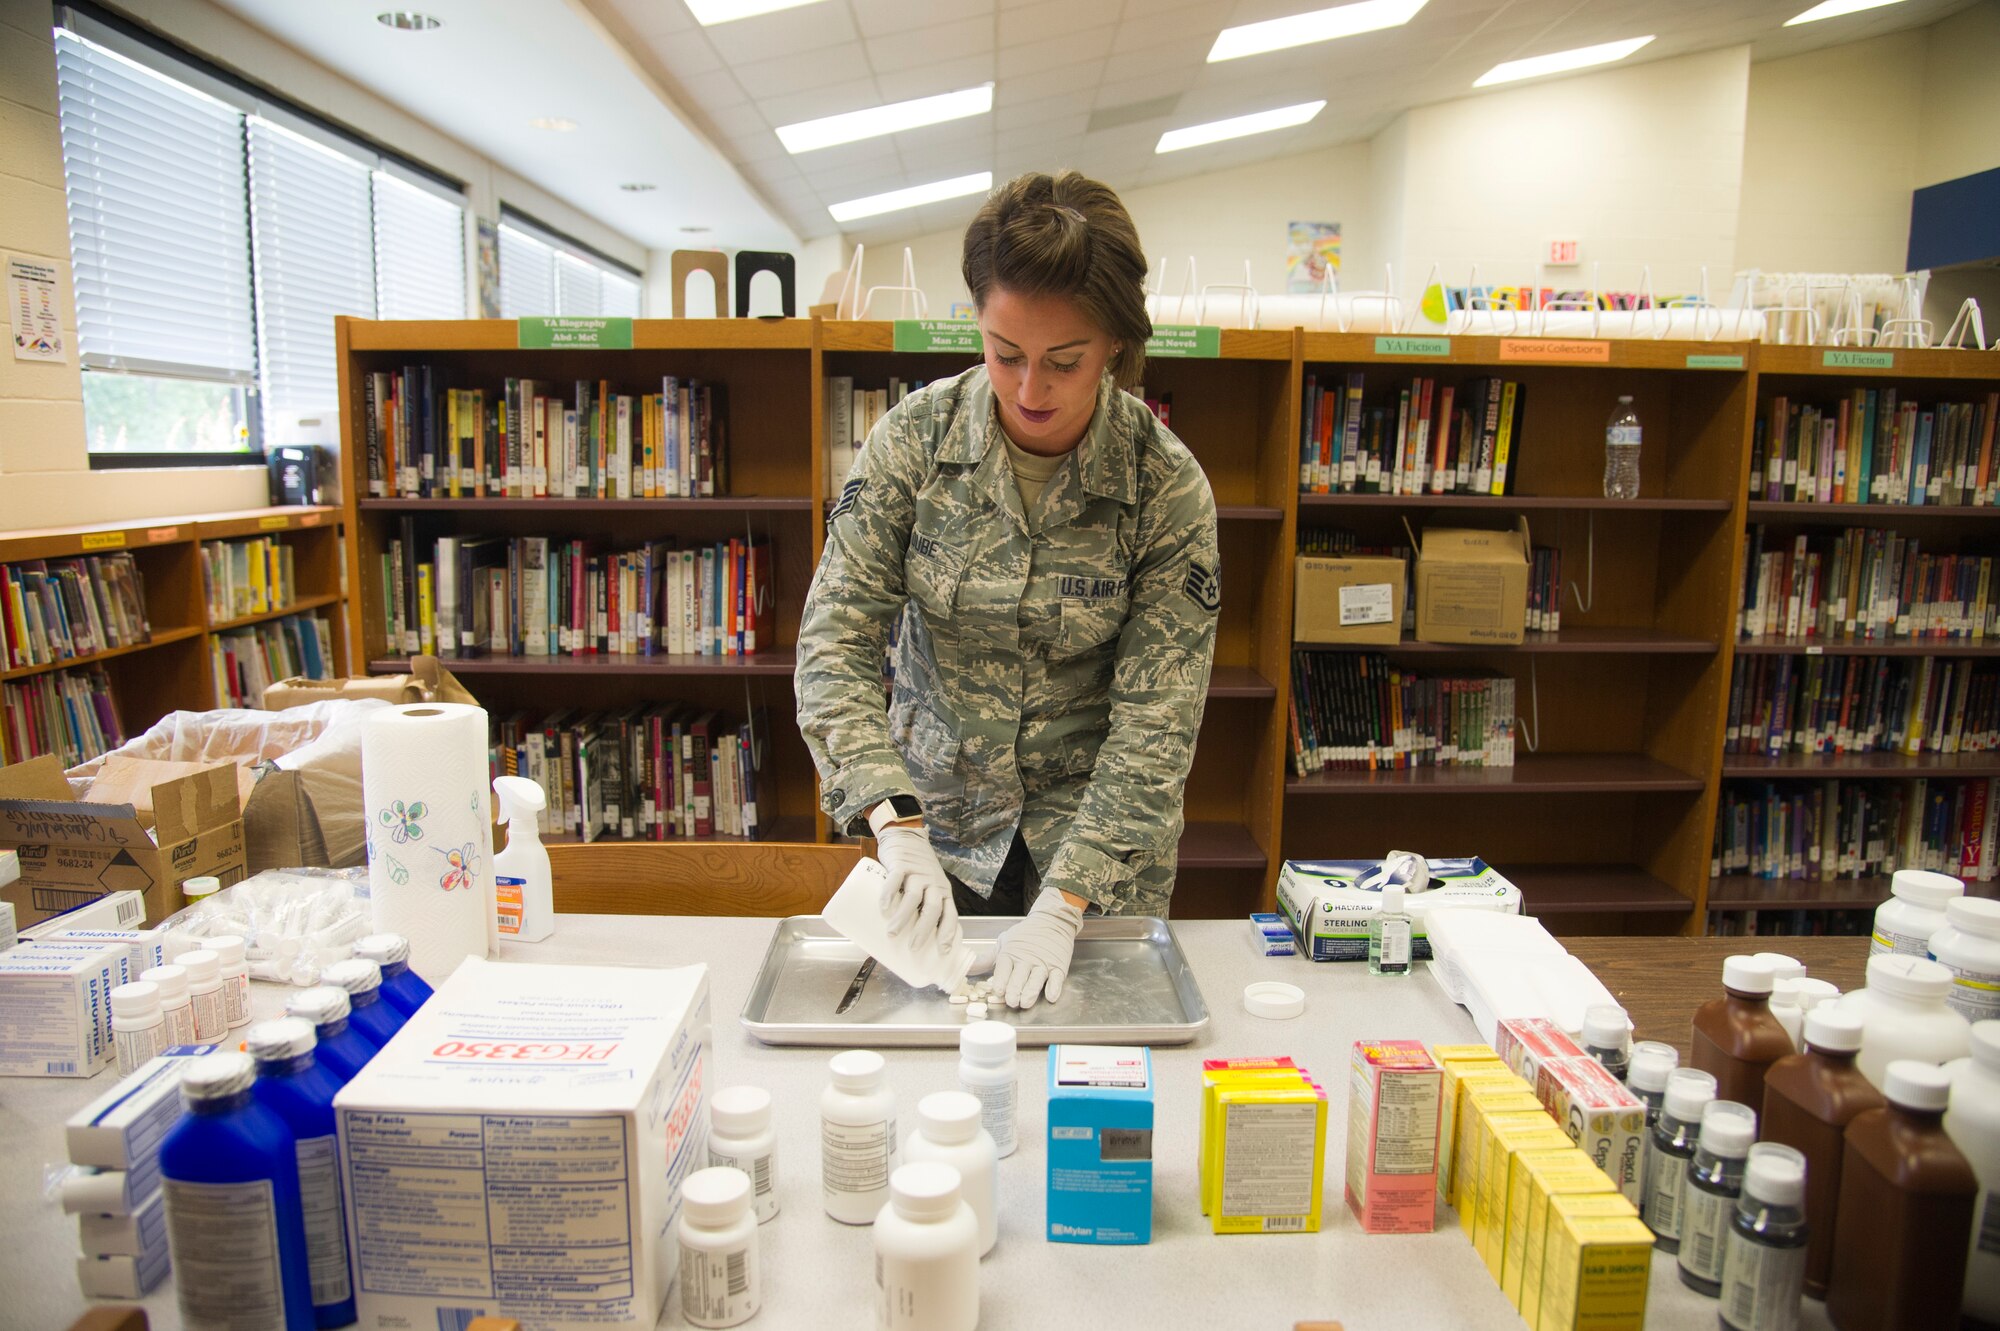 U.S. Air Force Staff Sgt. Jessica Dube, of Martinsburg, W. Va., a pharmacy technician with the West Virginia Air National Guard’s 167th Medical Group, prepares medication for distribution during the East Central Georgia Innovative Readiness Training in Crawfordville, Ga., July 13, 2018. An IRT provides hands-on, real-world training to improve readiness and interoperability for service members in complex contingency environments while providing key services for American communities. (U.S. Air Force photo by Master Sgt. Theanne Herrmann)